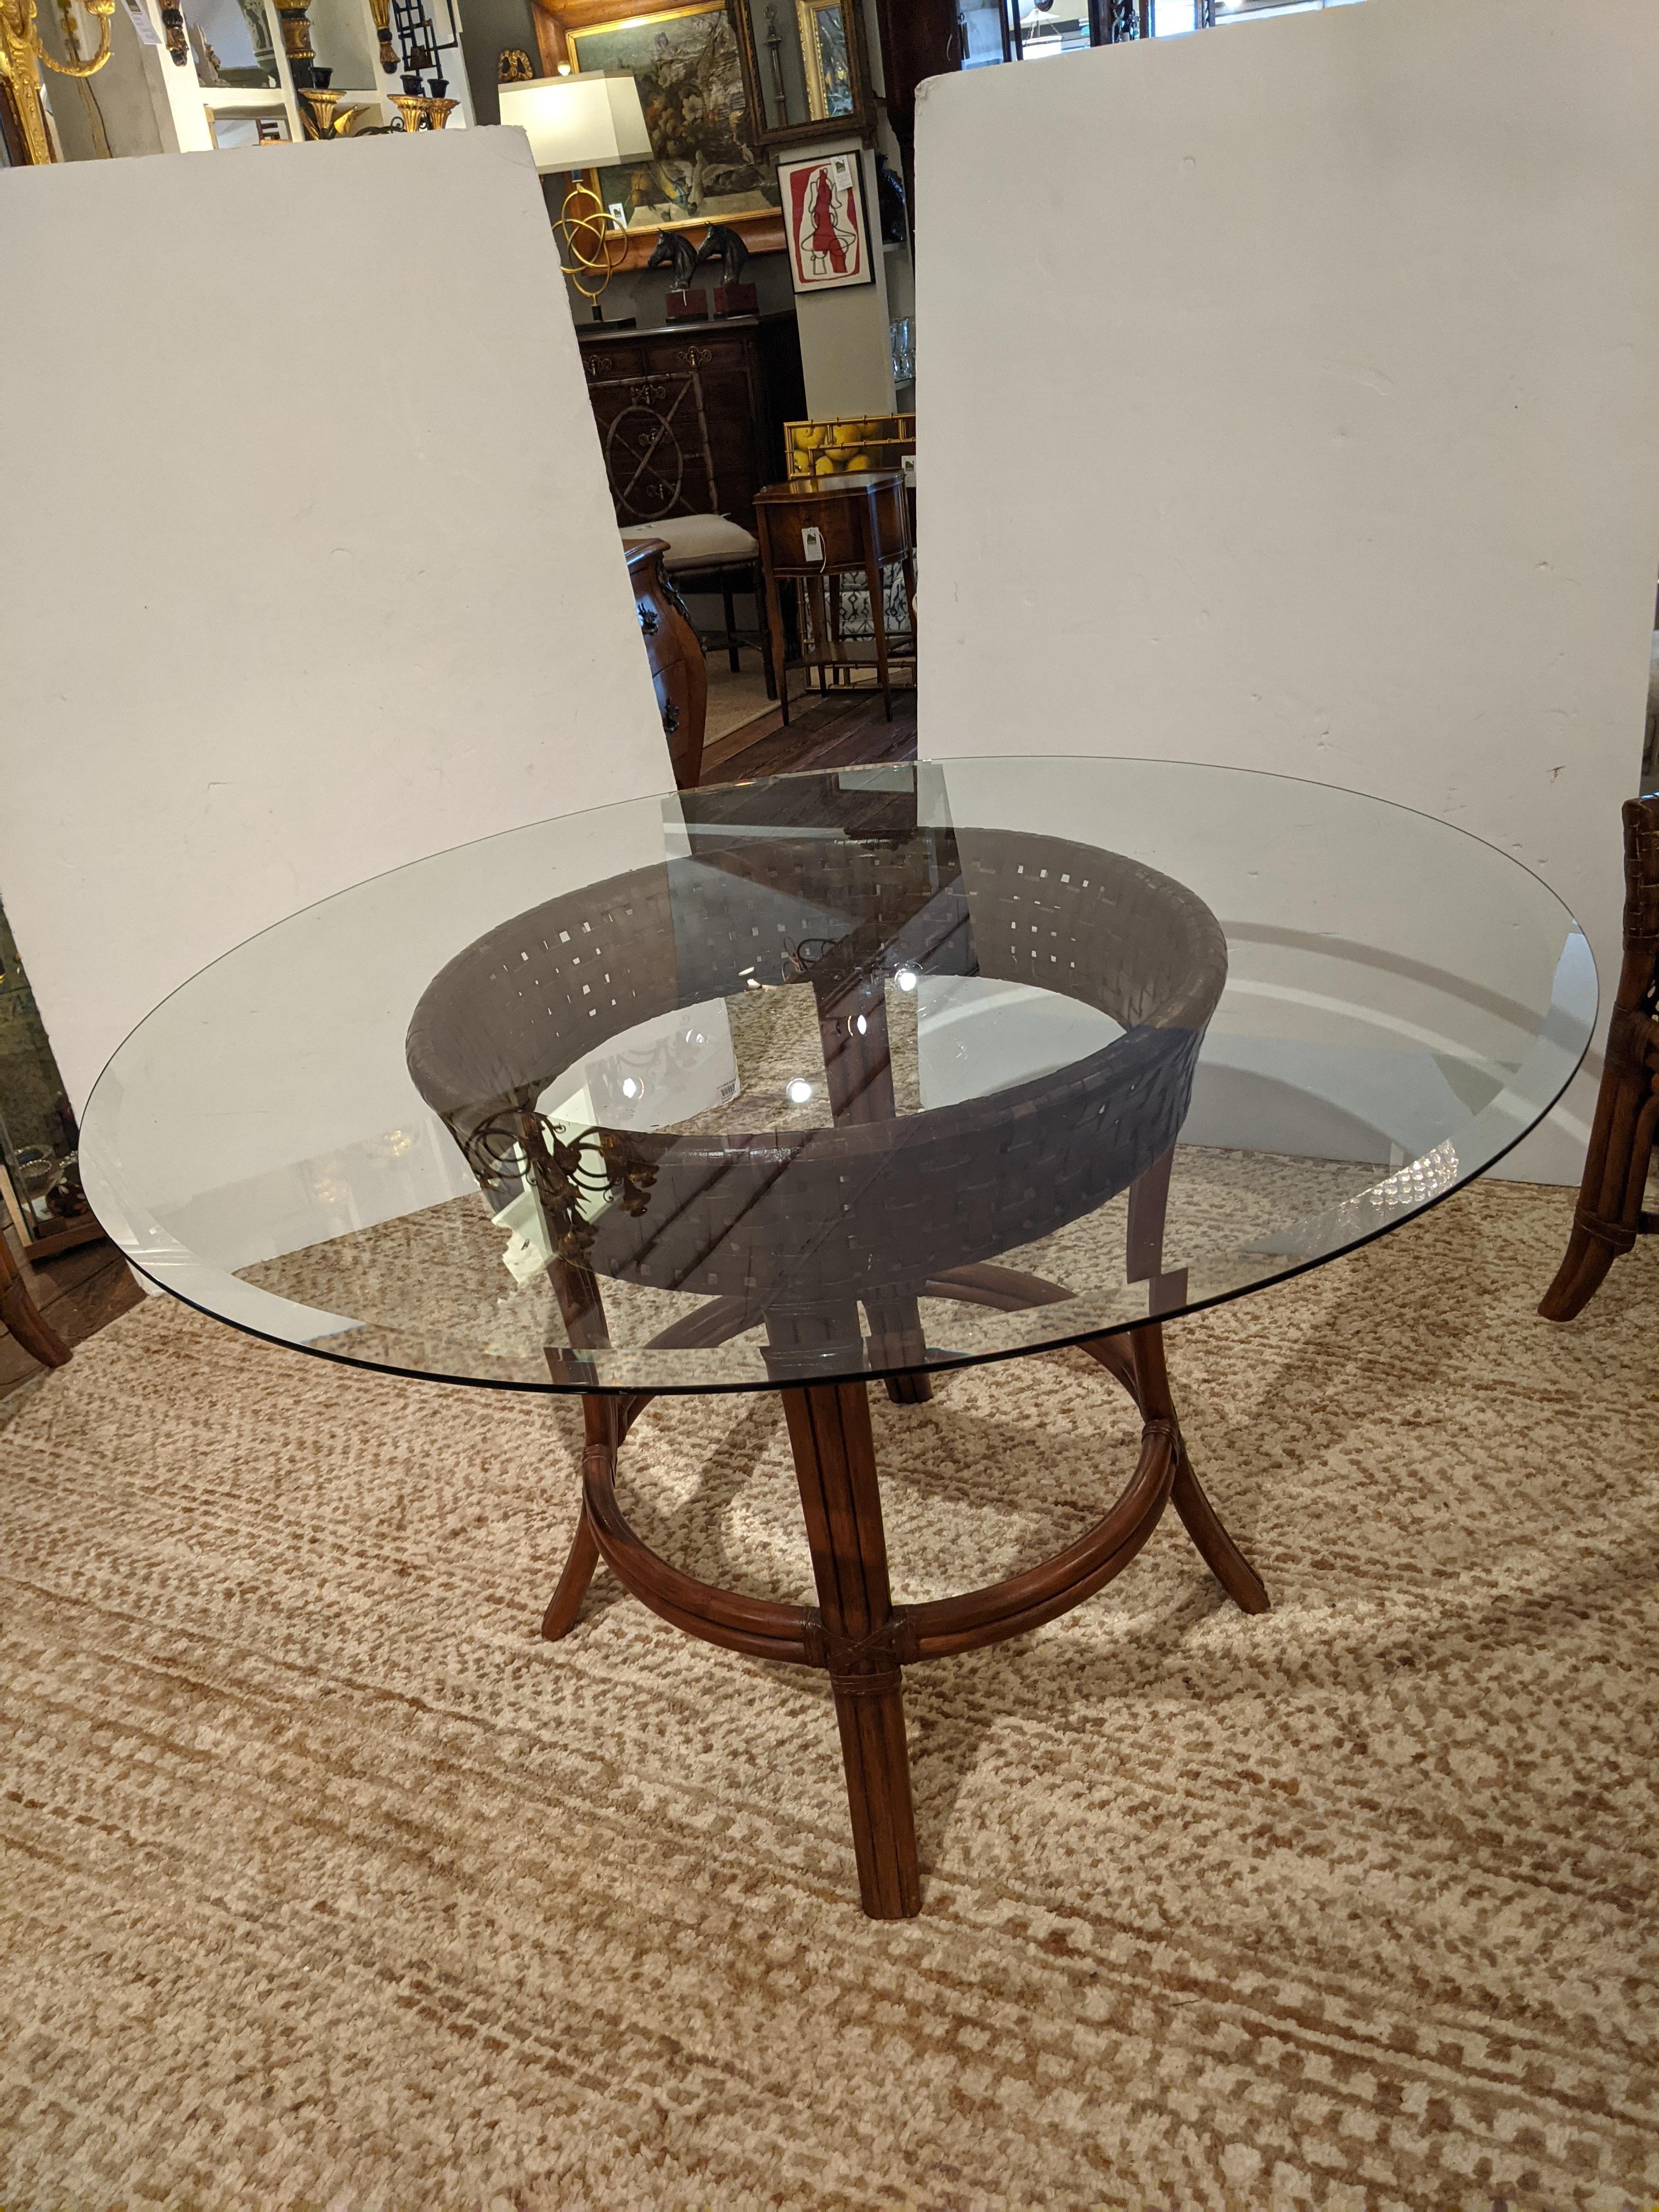 Leather Rich Set of McGuire Round Bamboo Rattan Glass Dining Table & 4 Chairs